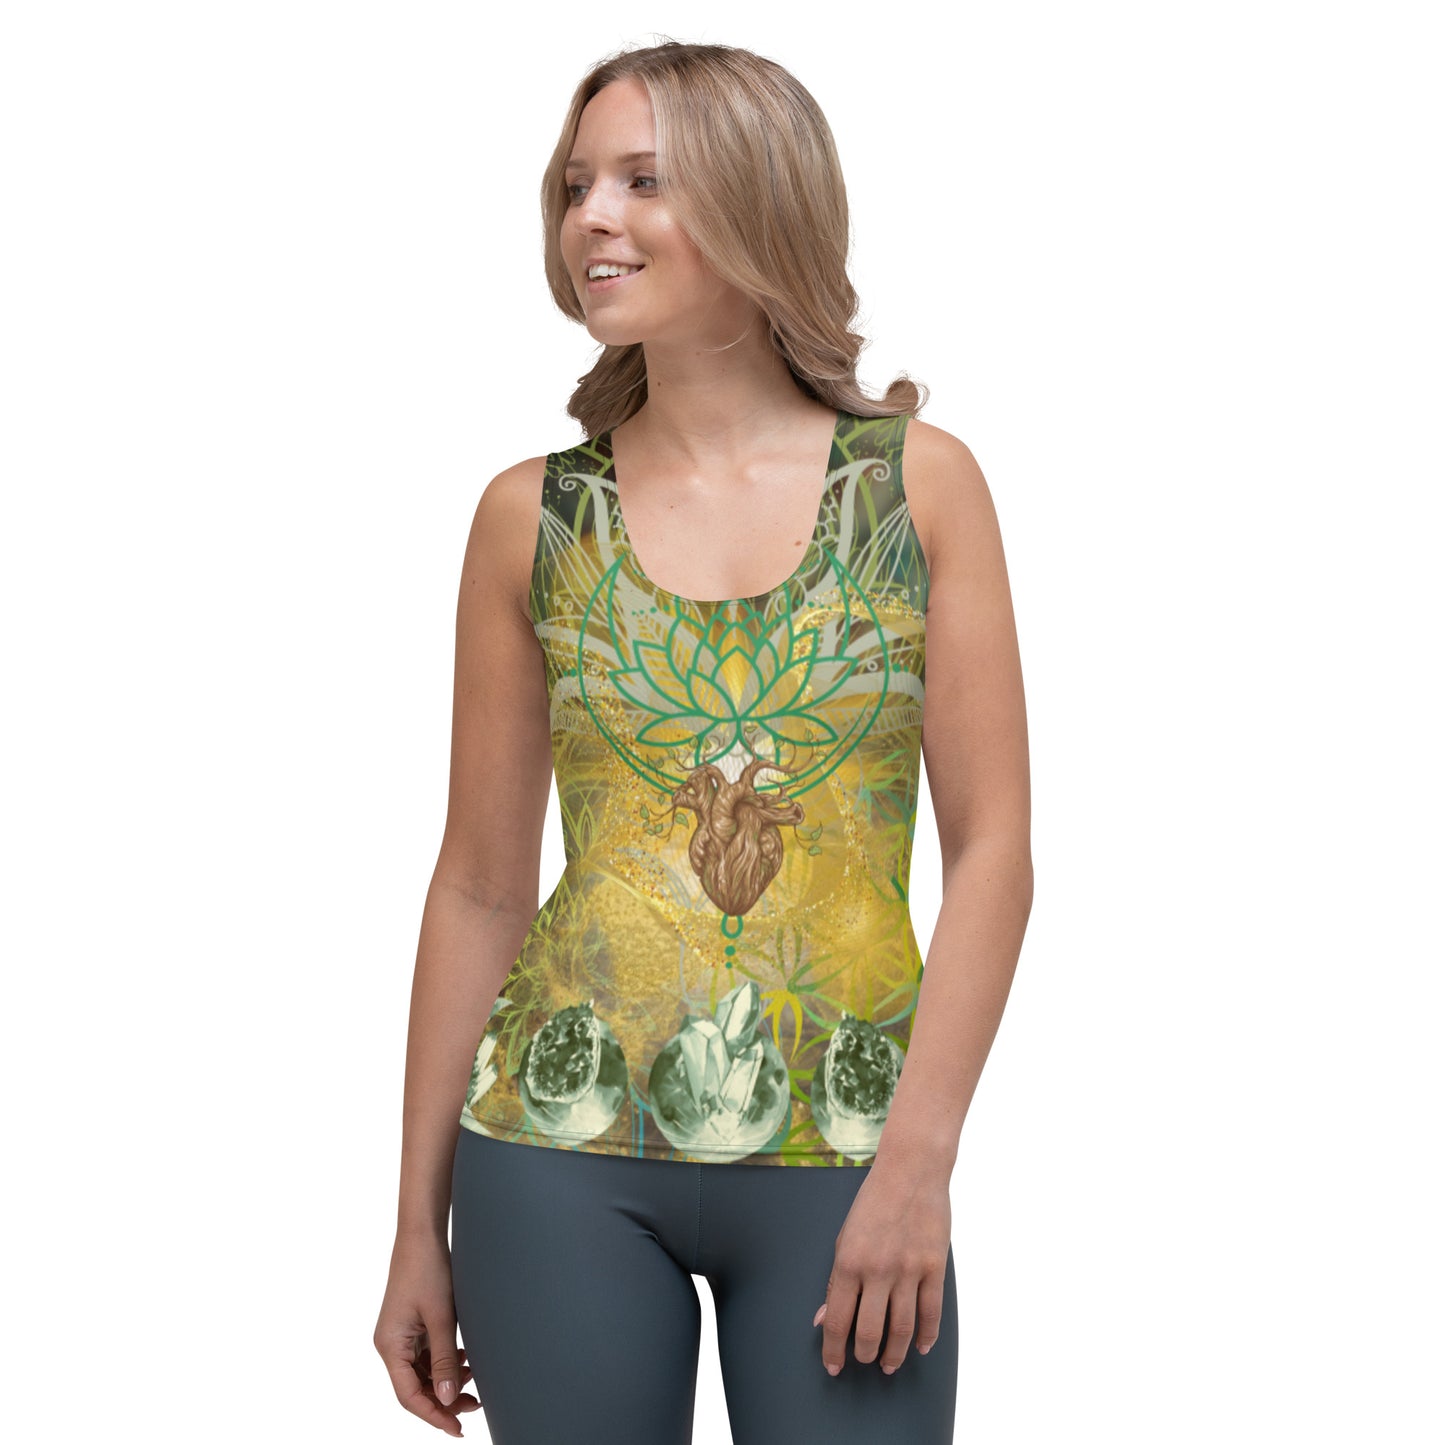 Geode Flower Of Life Abstract Print Psychedelic Festival Rave All Over Print TANK TOP